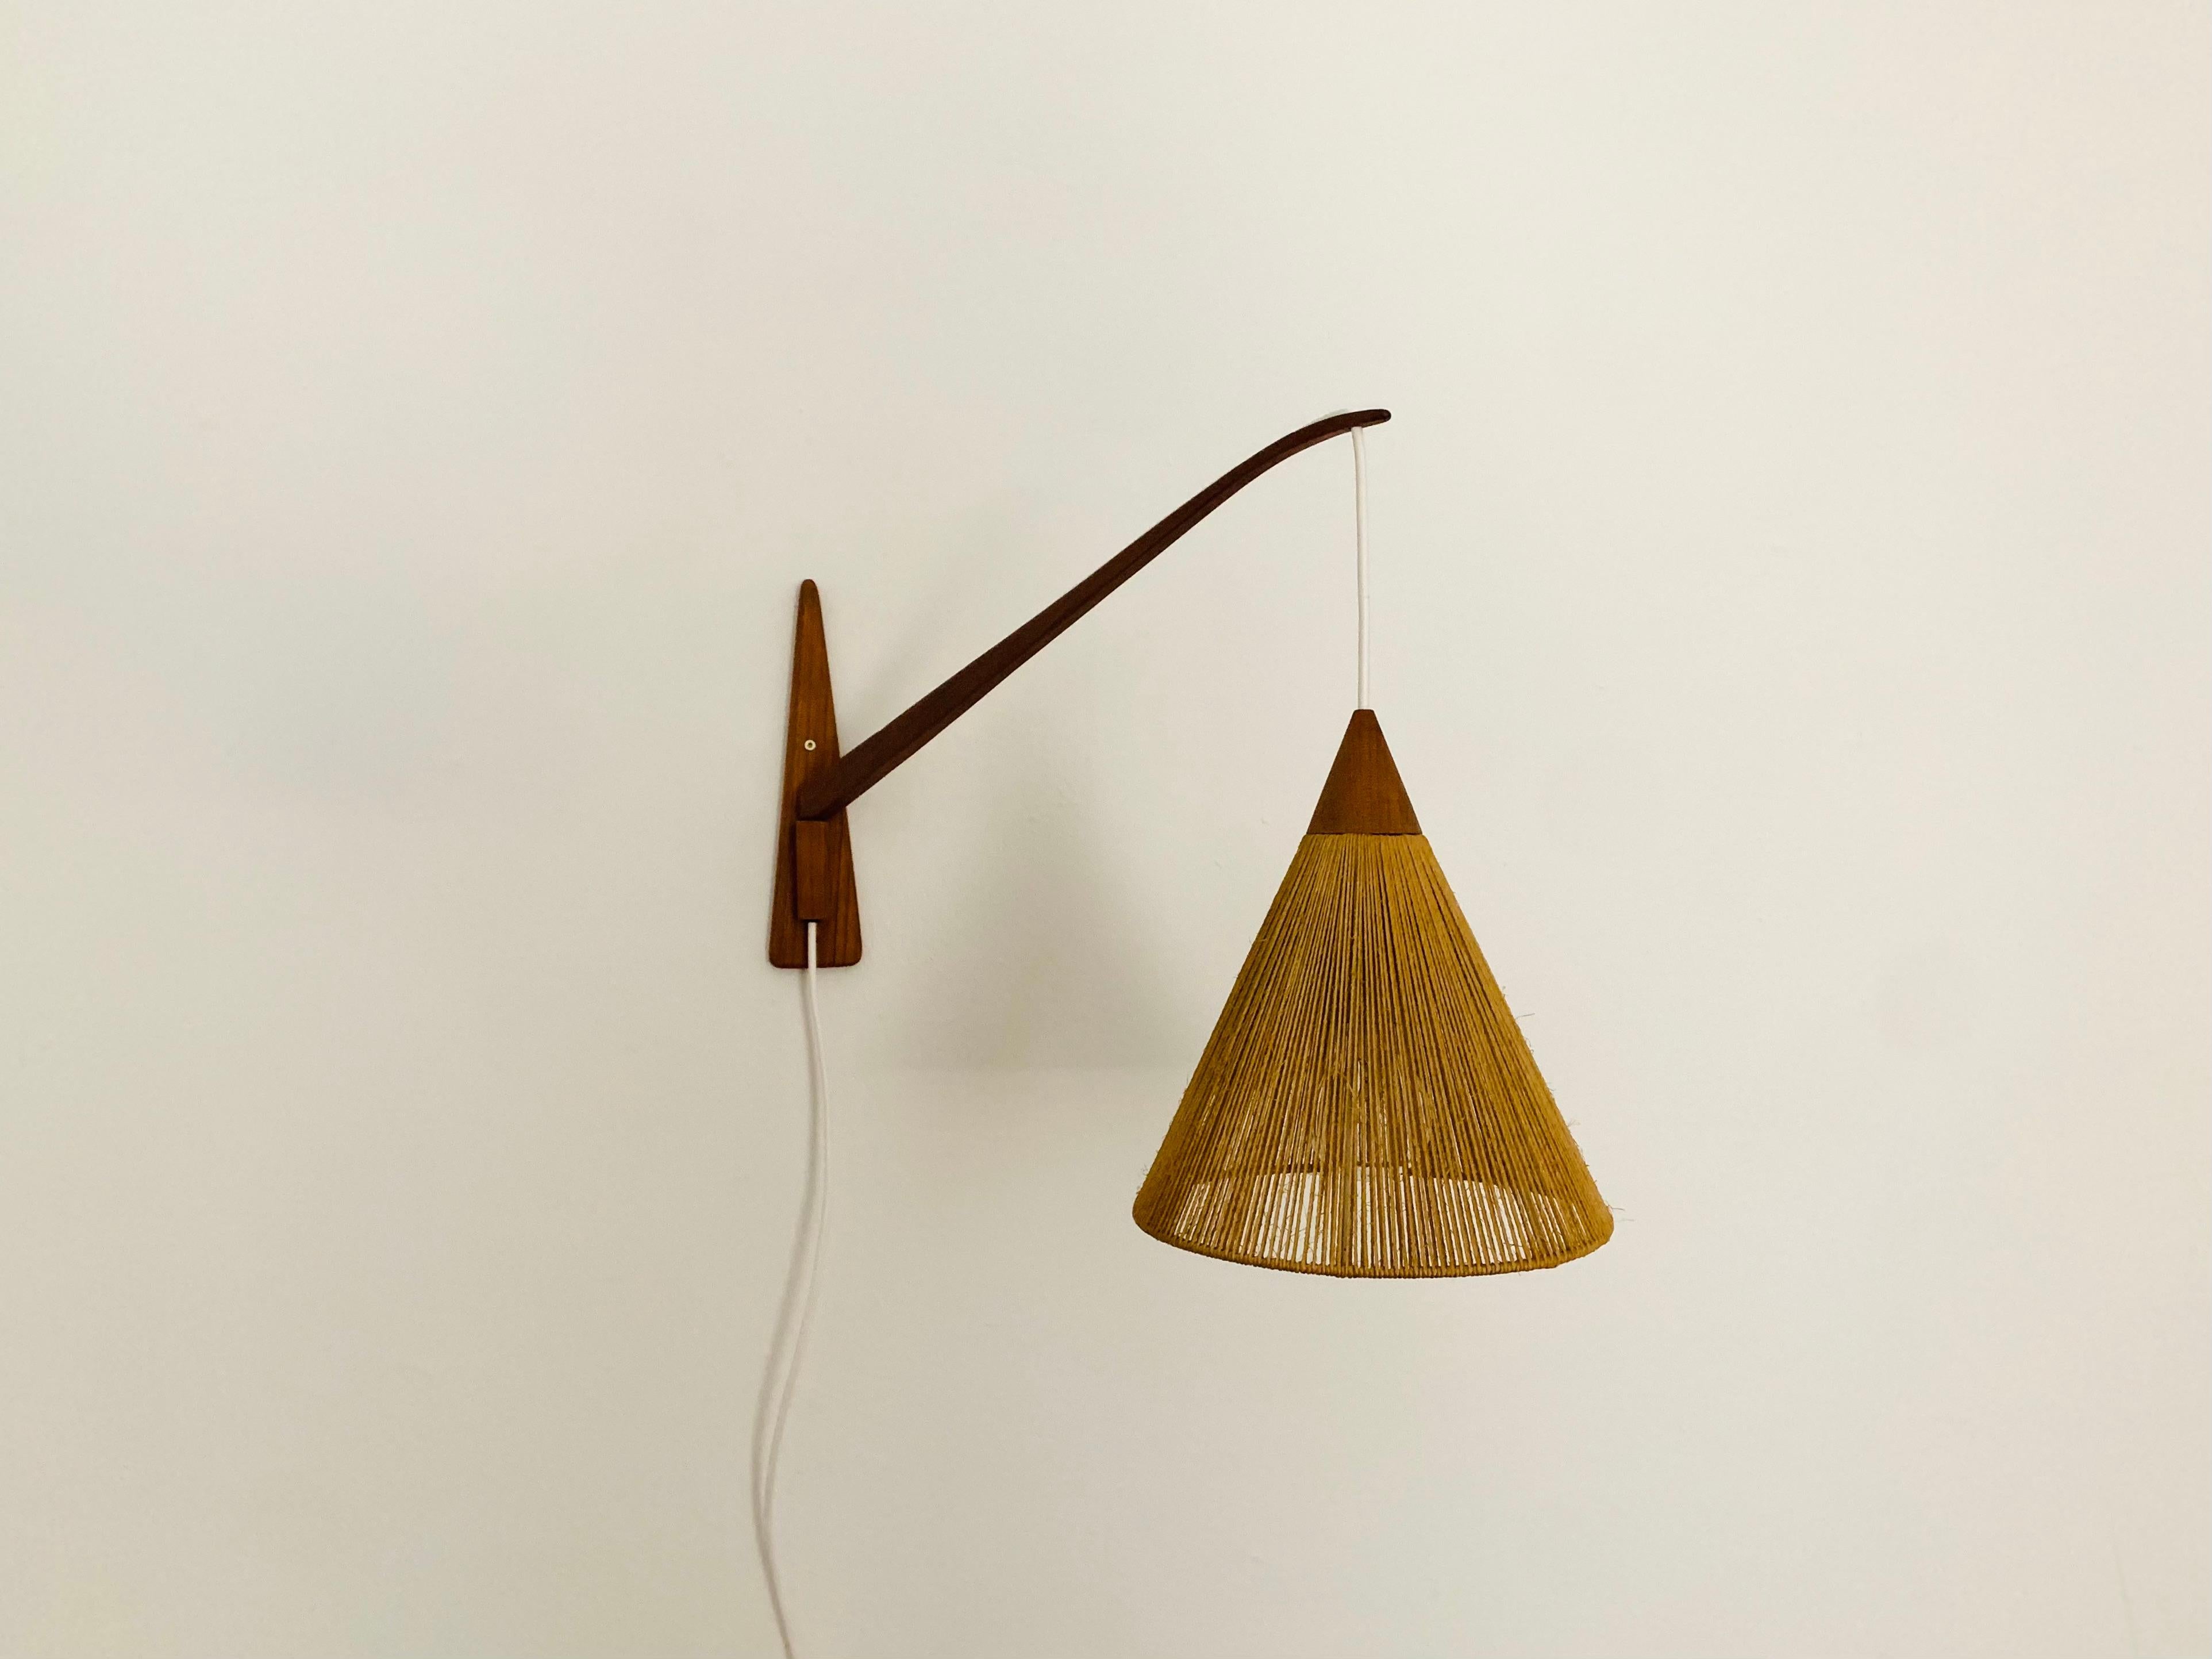 Wonderful teak wall lamp from the 1960s.
Great and exceptionally minimalist design with a fantastically elegant look.
The lampshade creates a spectacular play of light and creates a very cozy atmosphere.

Manufacturer: Temde

Condition:

Very good